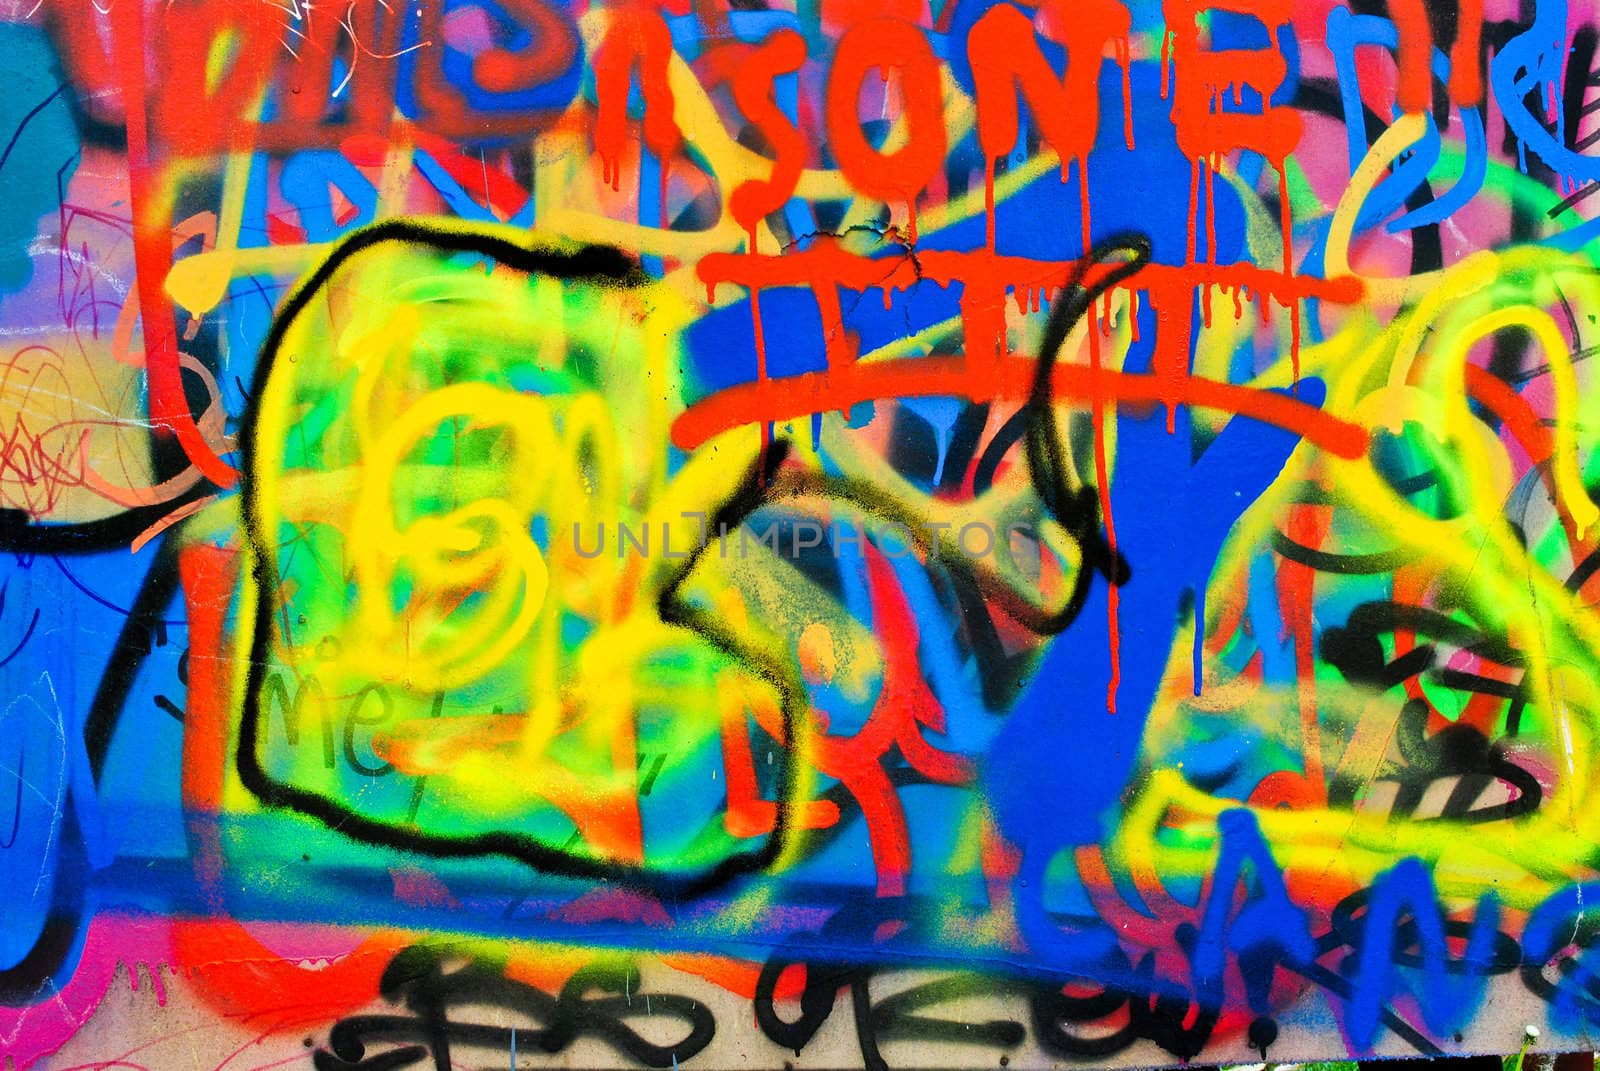 Colourful graffiti painting with blue, yellow and red